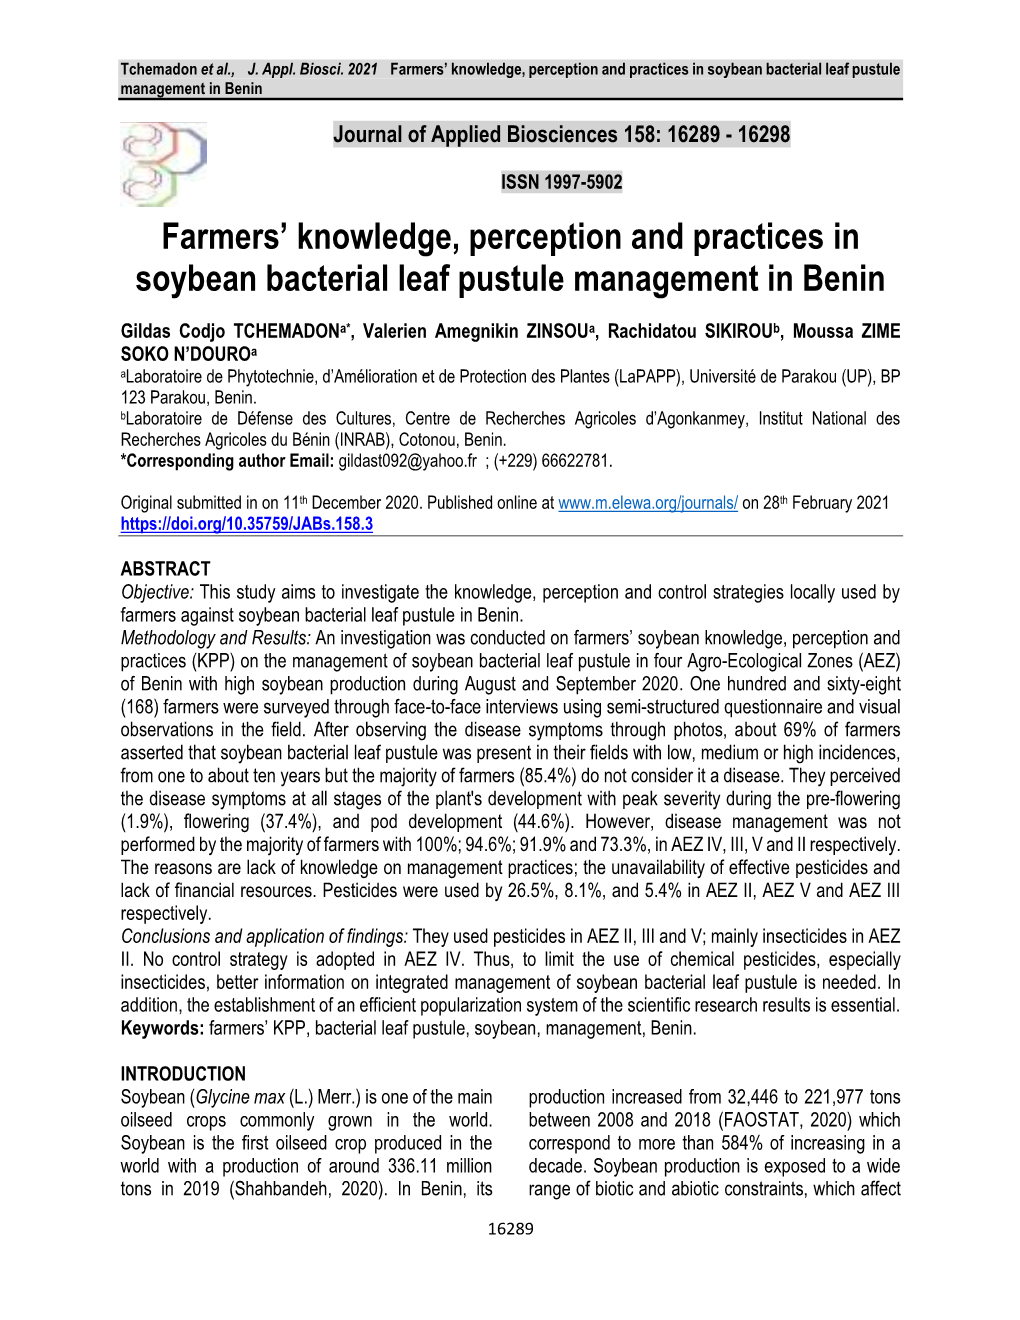 Farmers' Knowledge, Perception and Practices in Soybean Bacterial Leaf